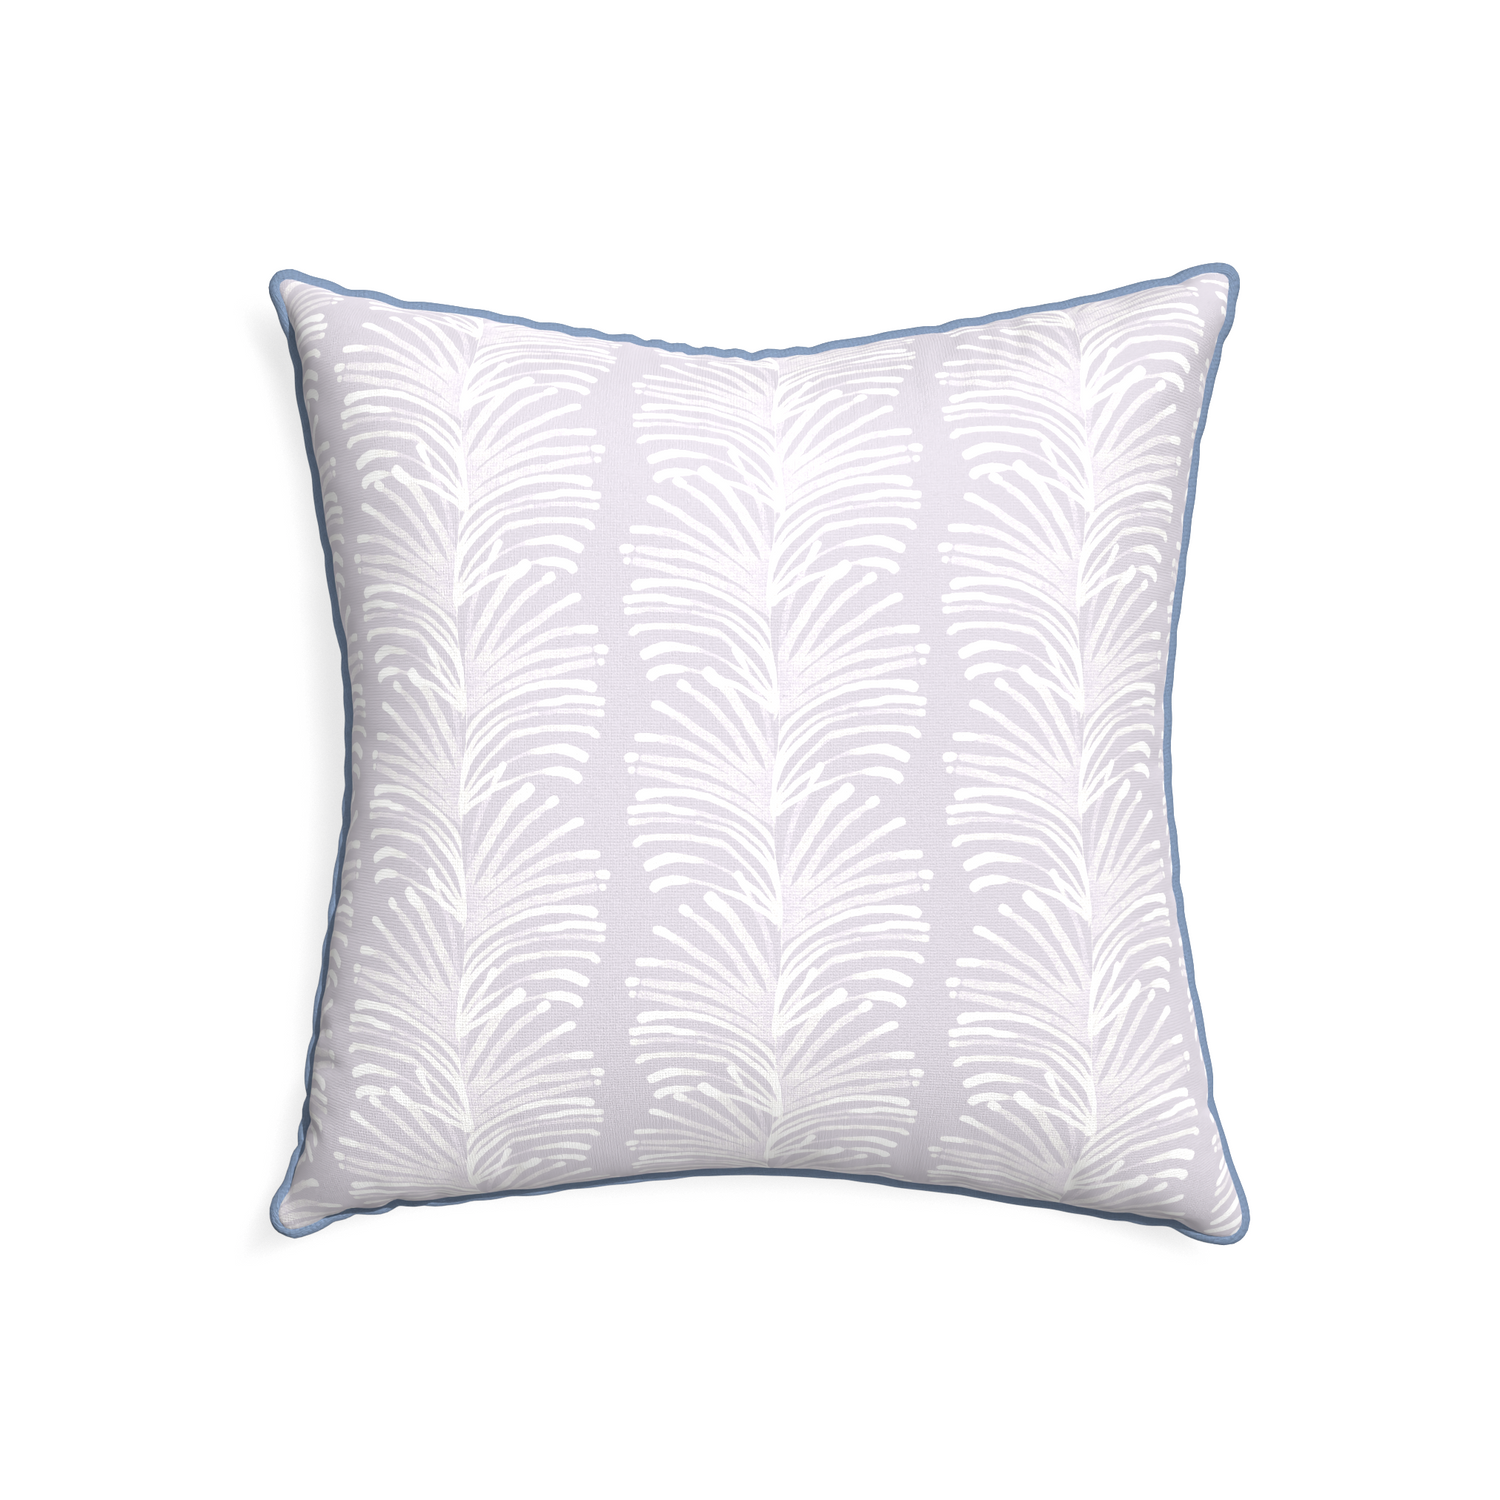 22-square emma lavender custom pillow with sky piping on white background